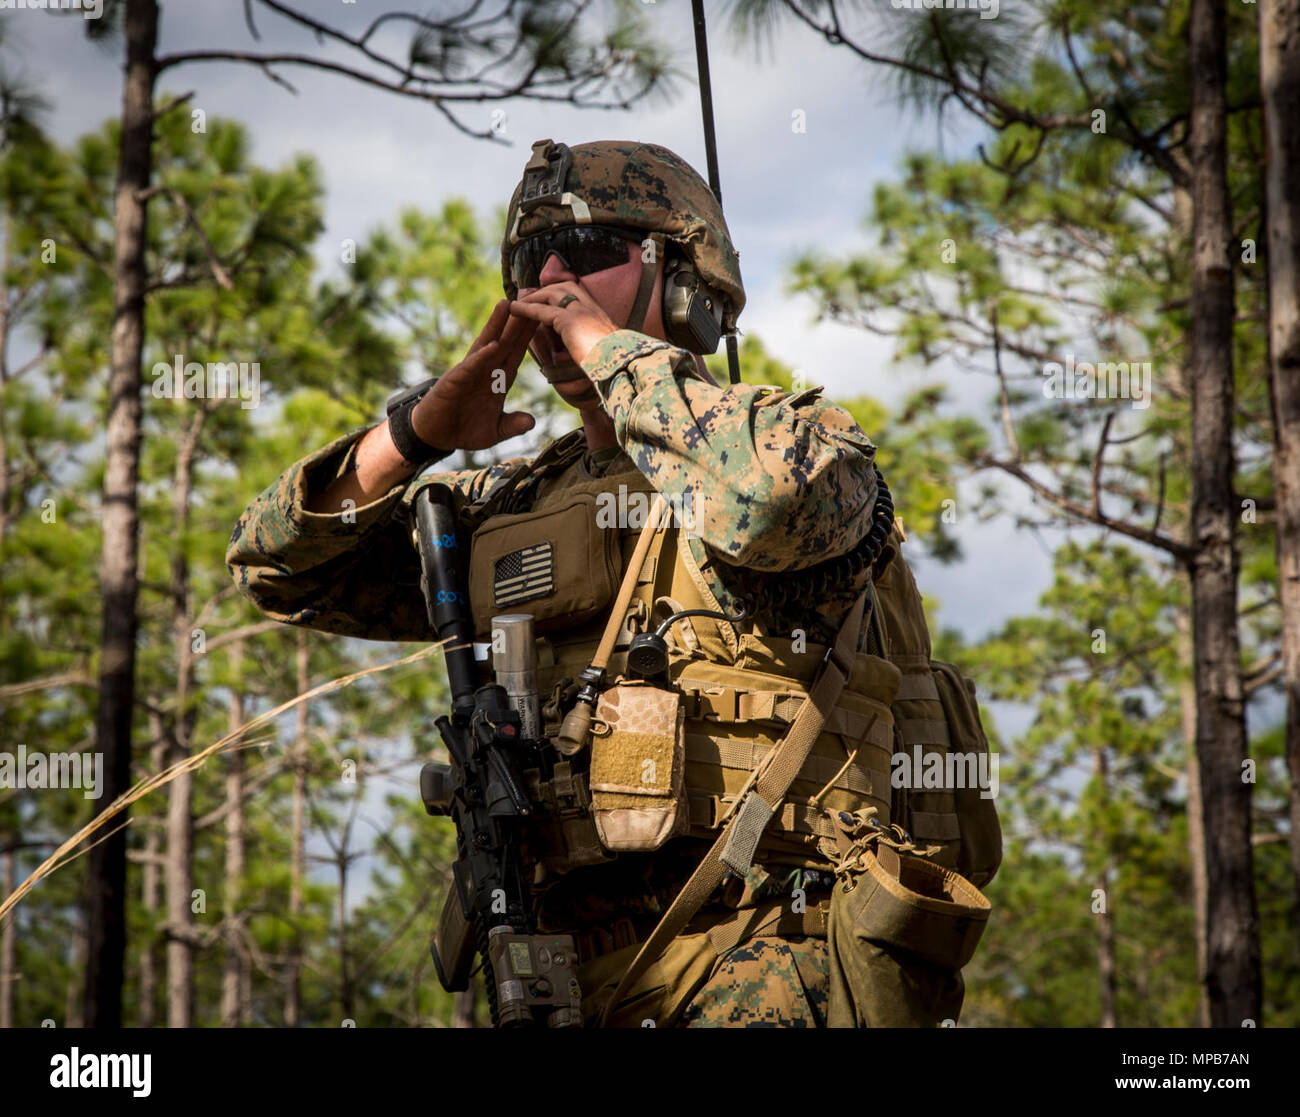 A U.S. Marine attached to Advanced Infantry Training Battalion, School of Infantry-East (SOI-E), shouts commands  during a combined arms exercise at Camp Lejeune, N.C., April 7, 2017. The mission of SOI-E is to train entry-level and advanced level Marines in the skills required of an Infantry Marine for the operating forces. Stock Photo